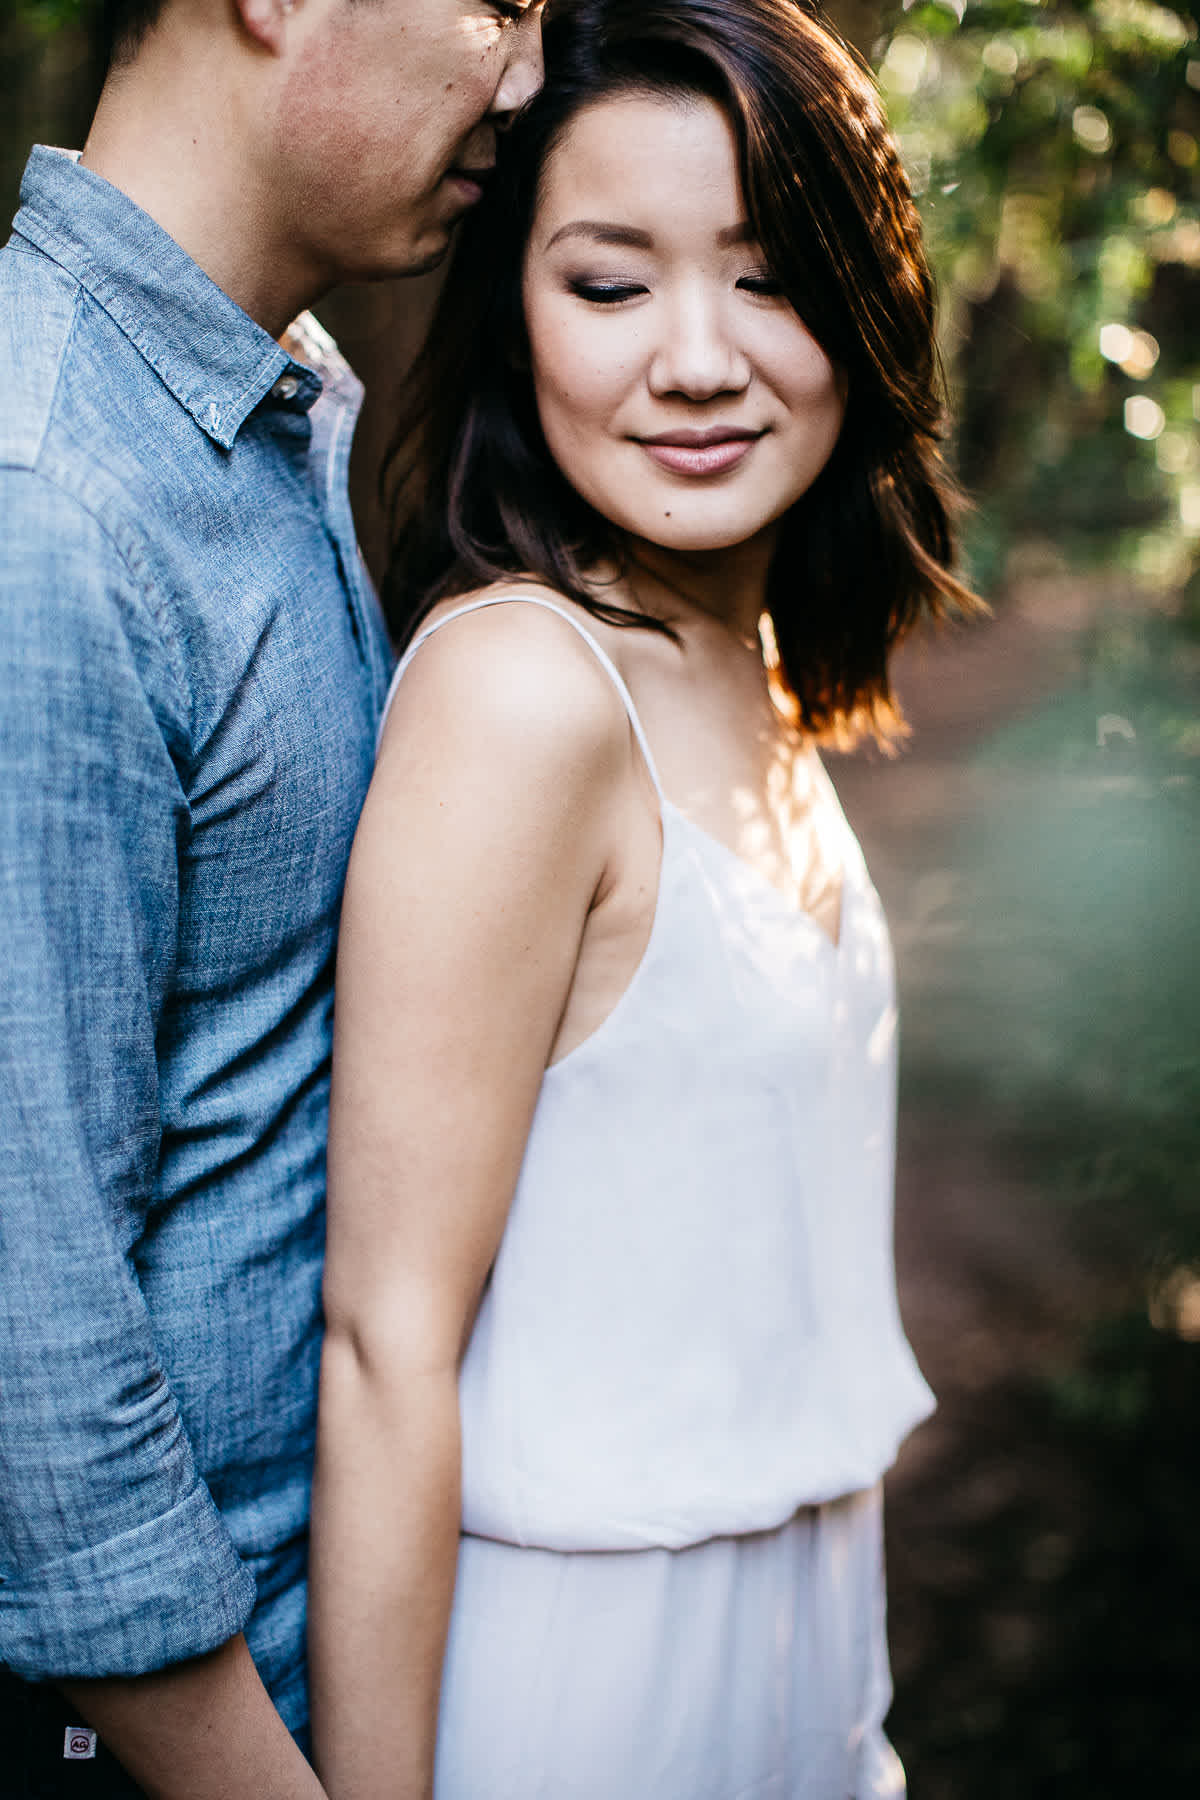 oakland-california-lifestyle-engagment-session-redwood-hills-30